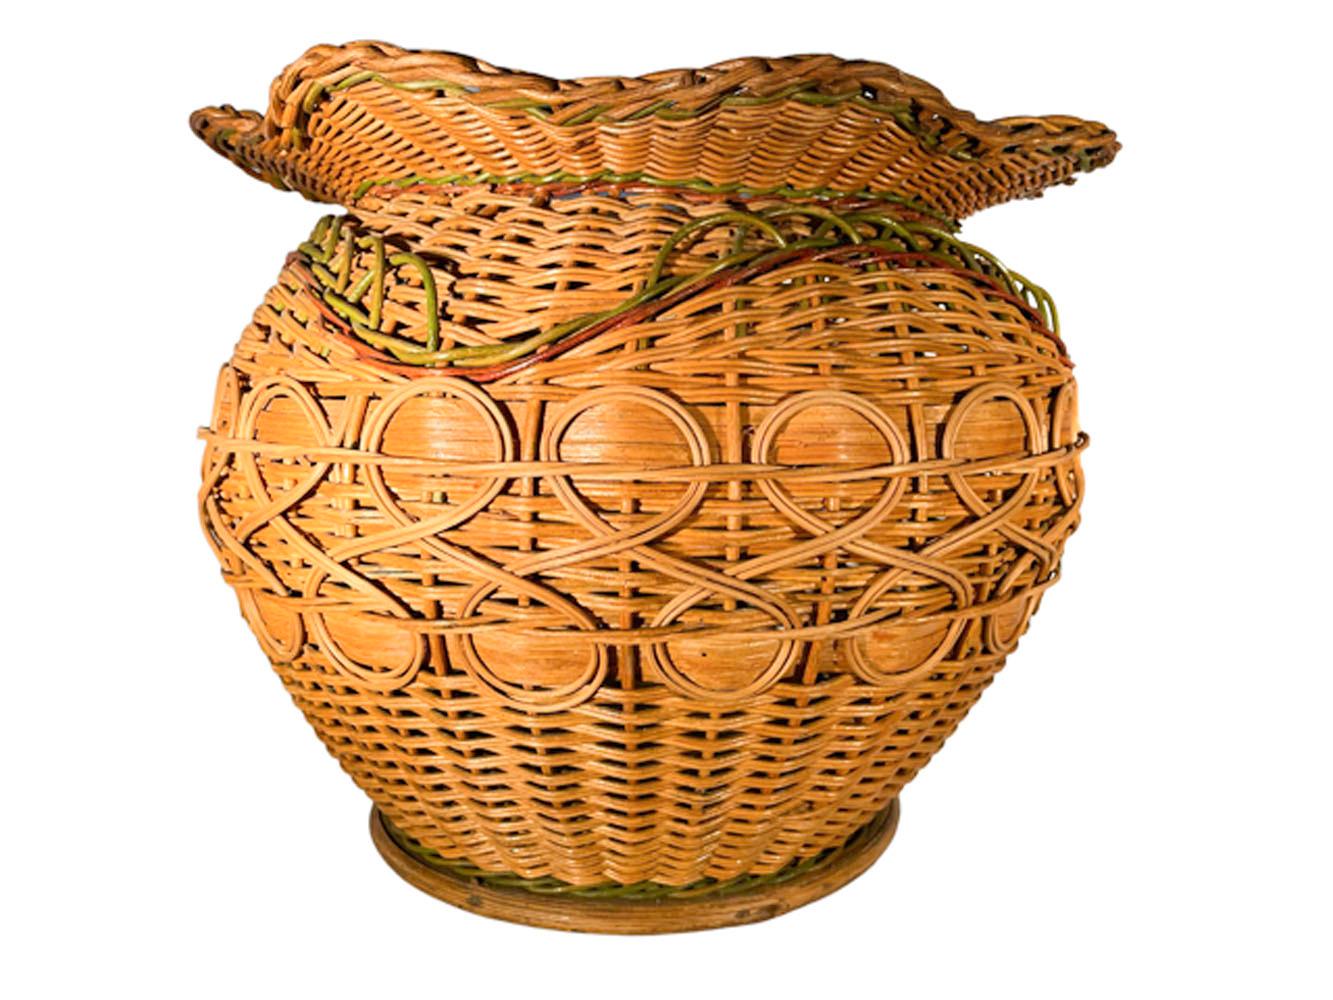 Large, early 20th century, wicker cachepot / planter of circular form with a serpentine rim woven in natural cane and decorated with red and green colored cane as well as woven detail all set on a wood base. Excellent Condition. 

Overall:
11.5